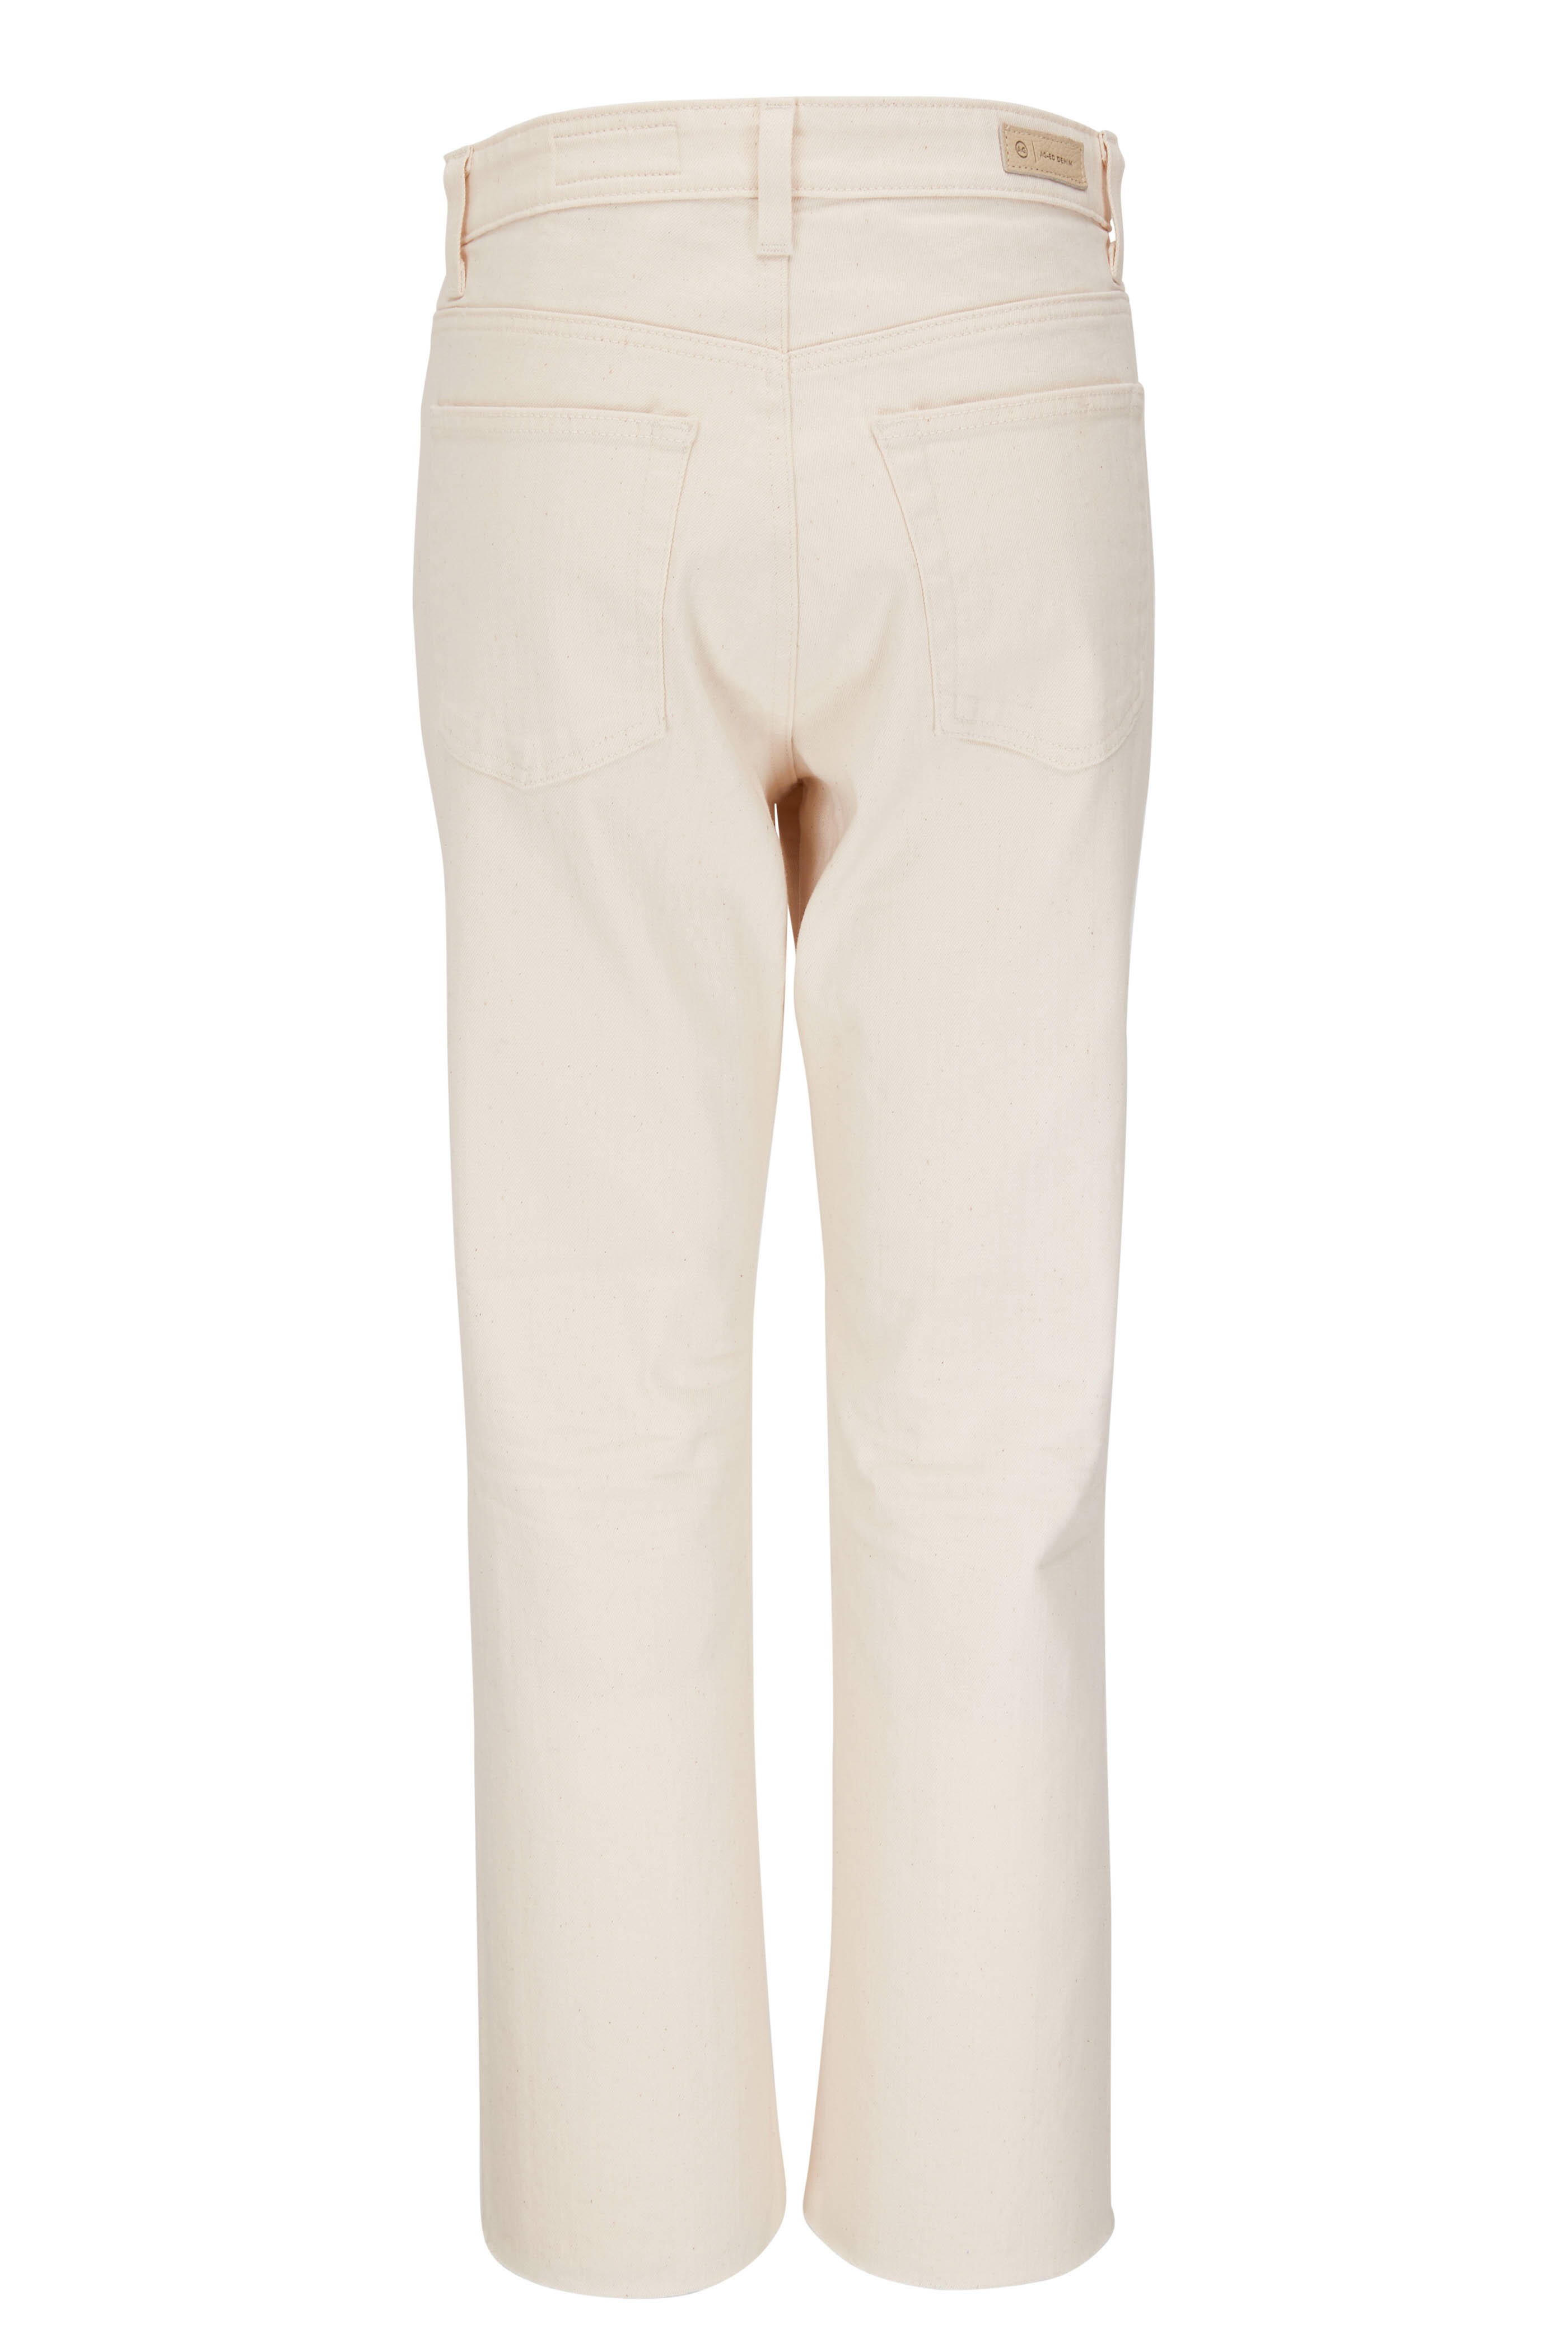 AG - Kinsley Natural Beige High-Rise Crop Jean | Mitchell Stores